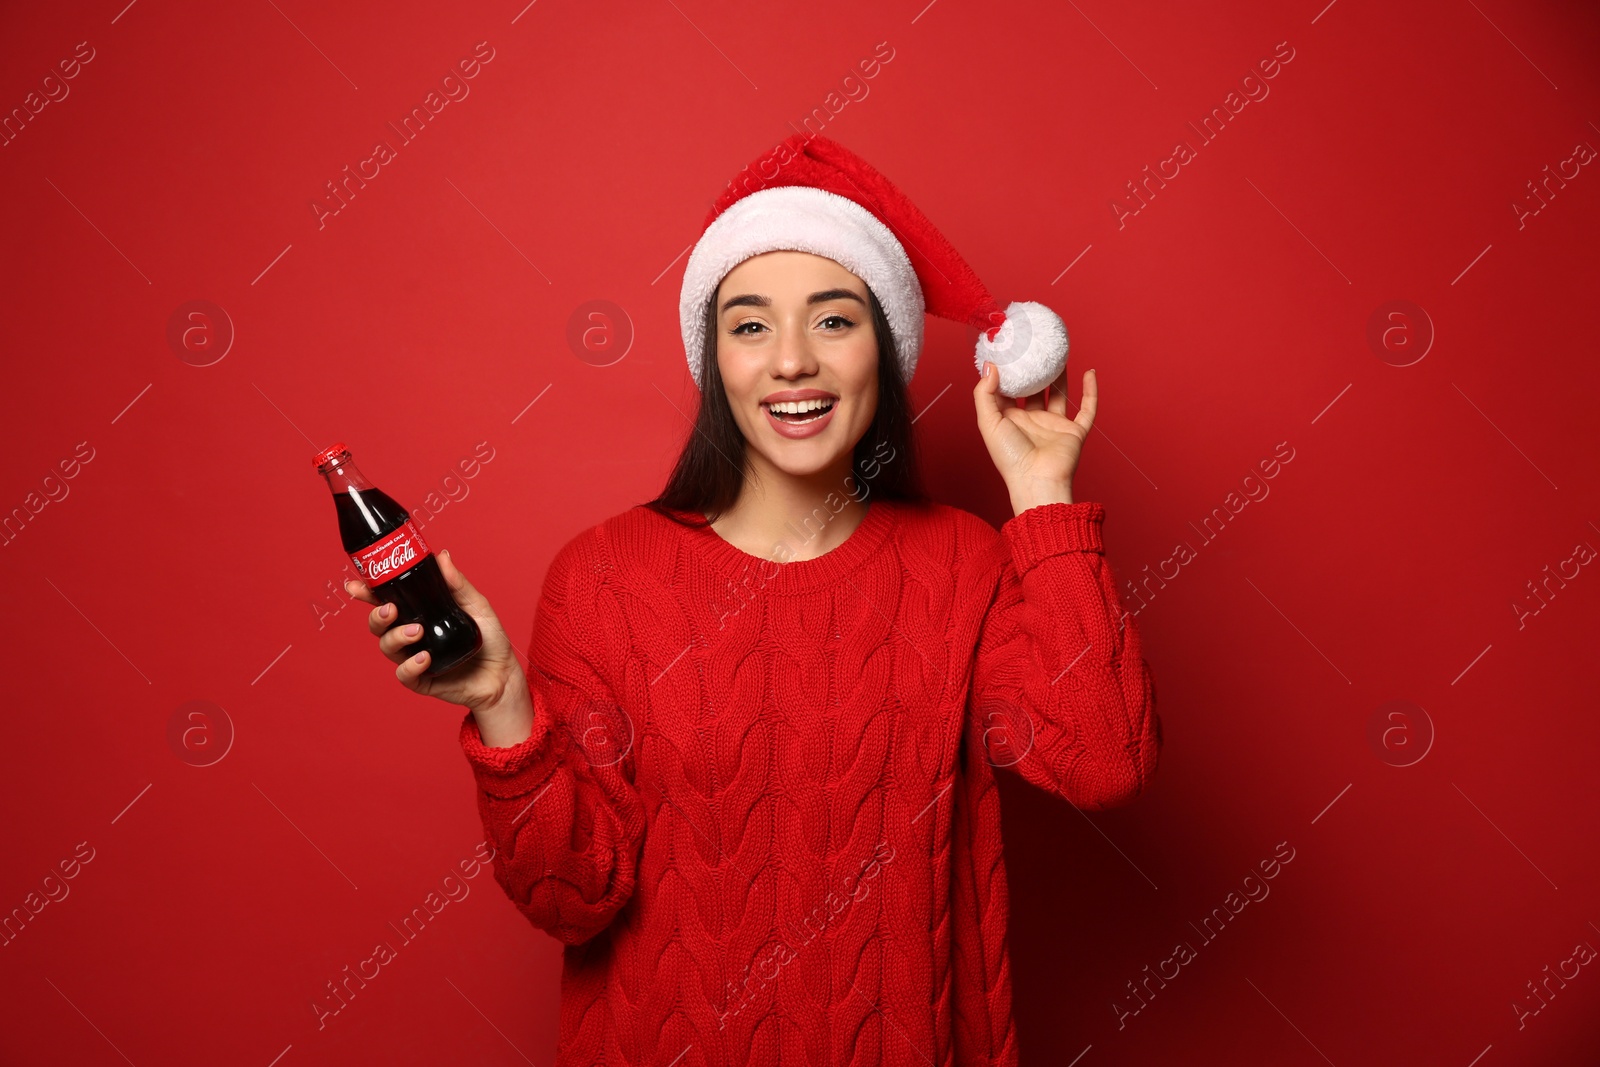 Photo of MYKOLAIV, UKRAINE - JANUARY 27, 2021: Young woman in Christmas hat holding bottle of Coca-Cola on red background